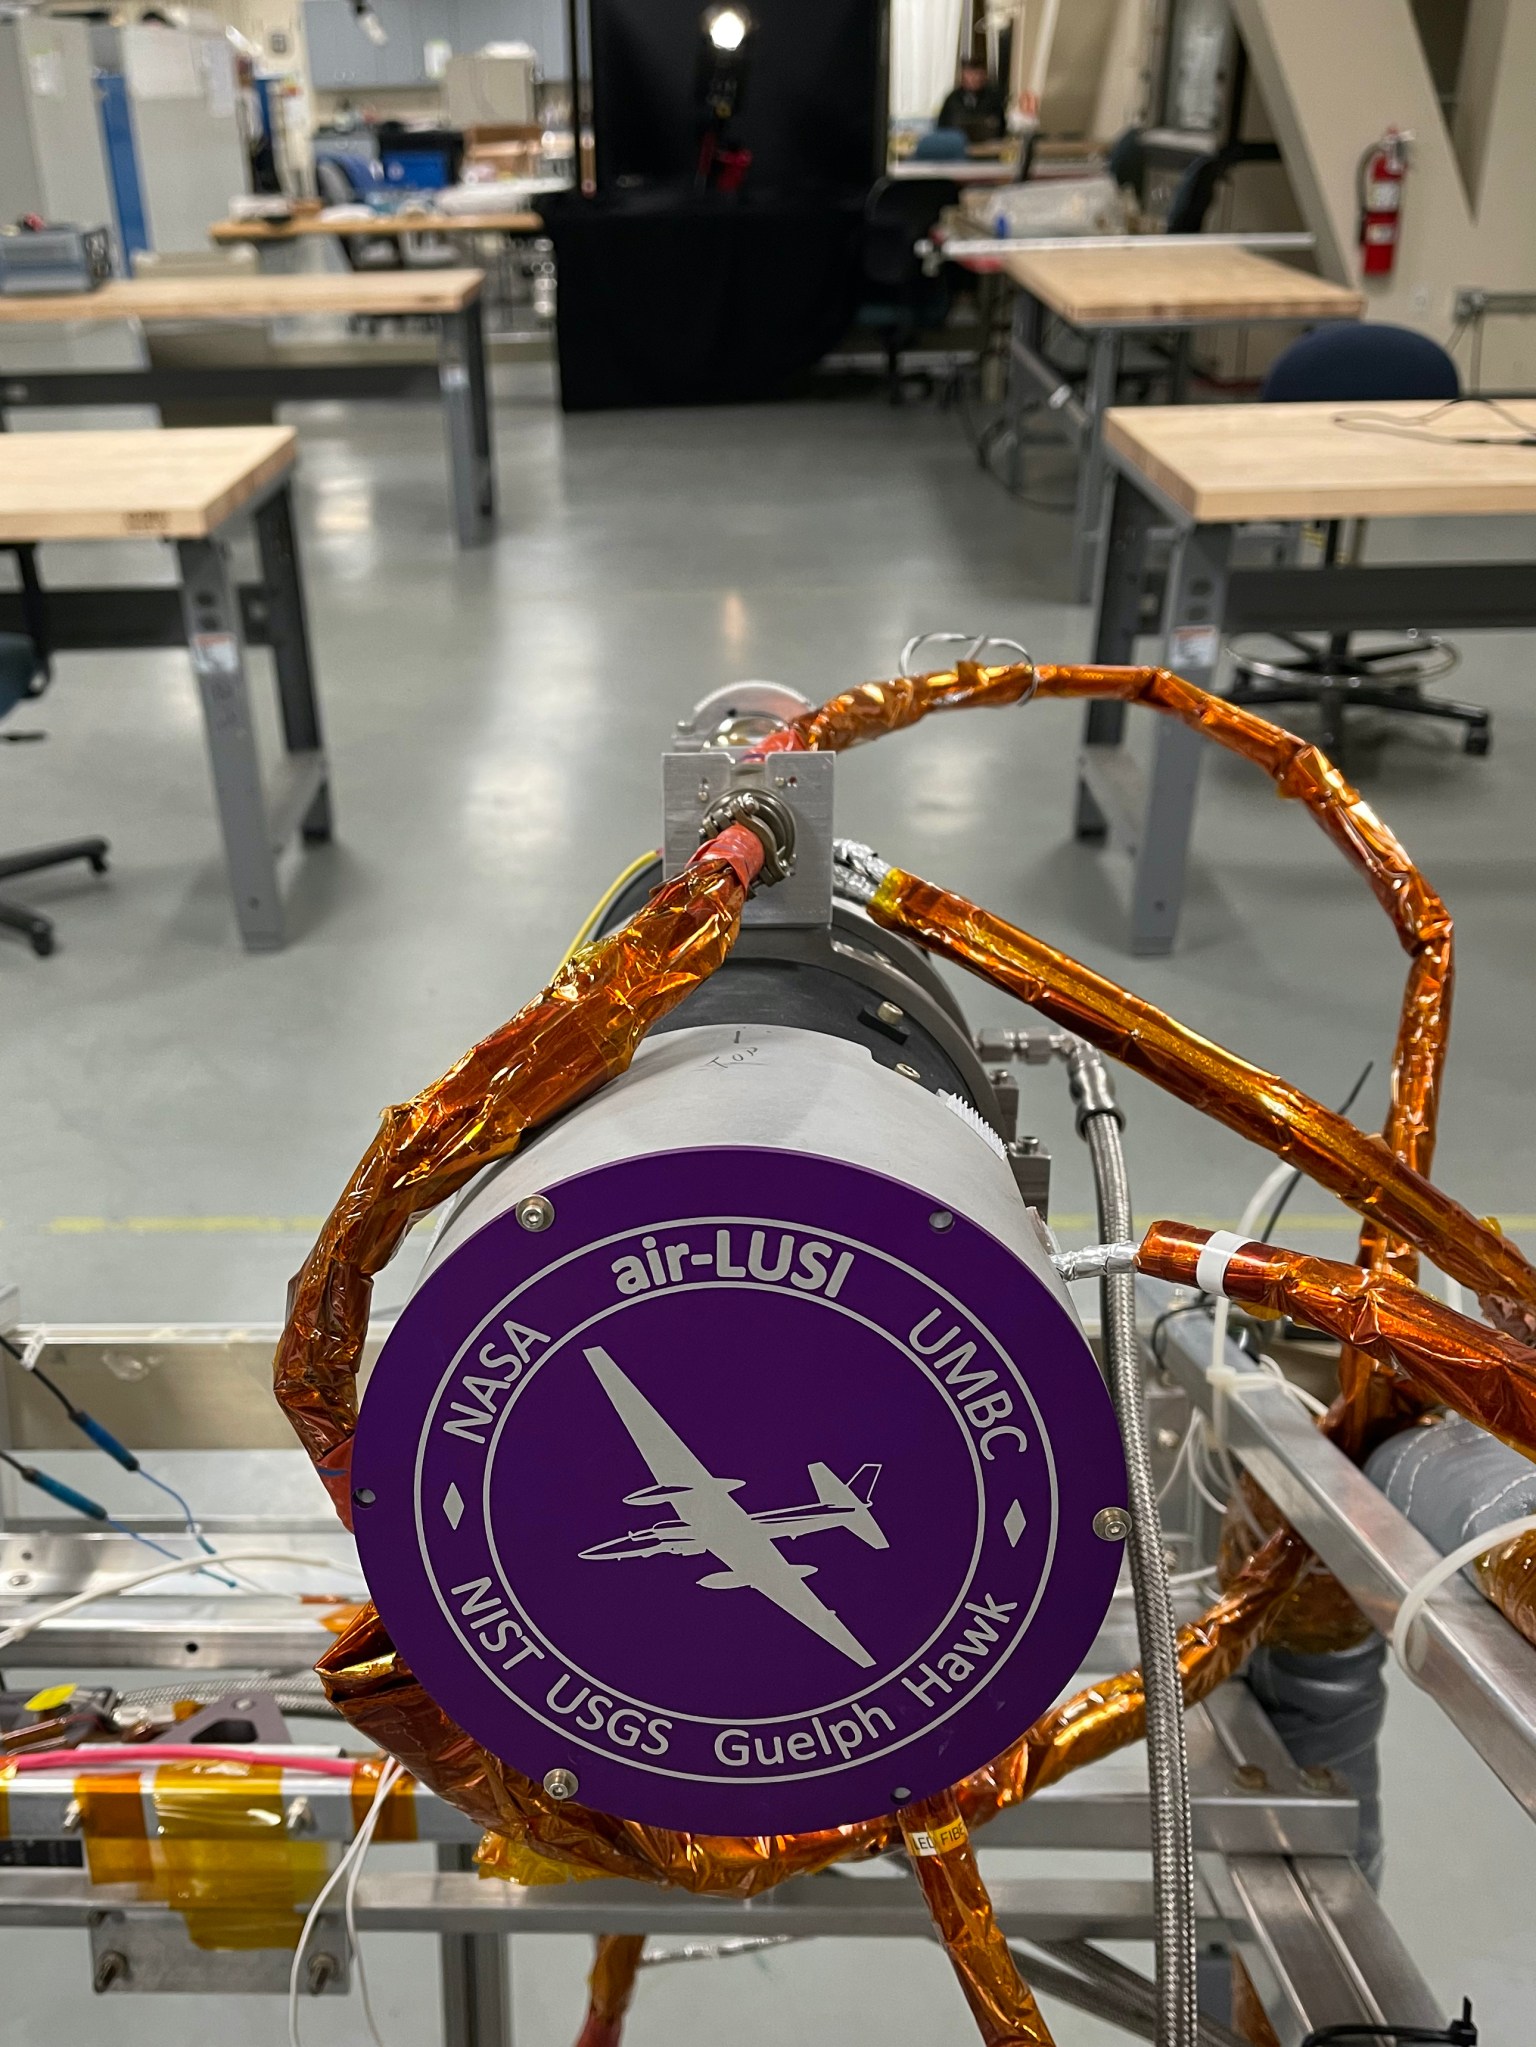 The cylindrical air-LUSI telescope is positioned to measure a simulated Moon at the far end of a laboratory. The instrument is a cylinder with a purple label on the front that says NASA air-LUSI, UMBC, NIST, USGS, Guelph Hawk. Bronze wires extend from the instrument.